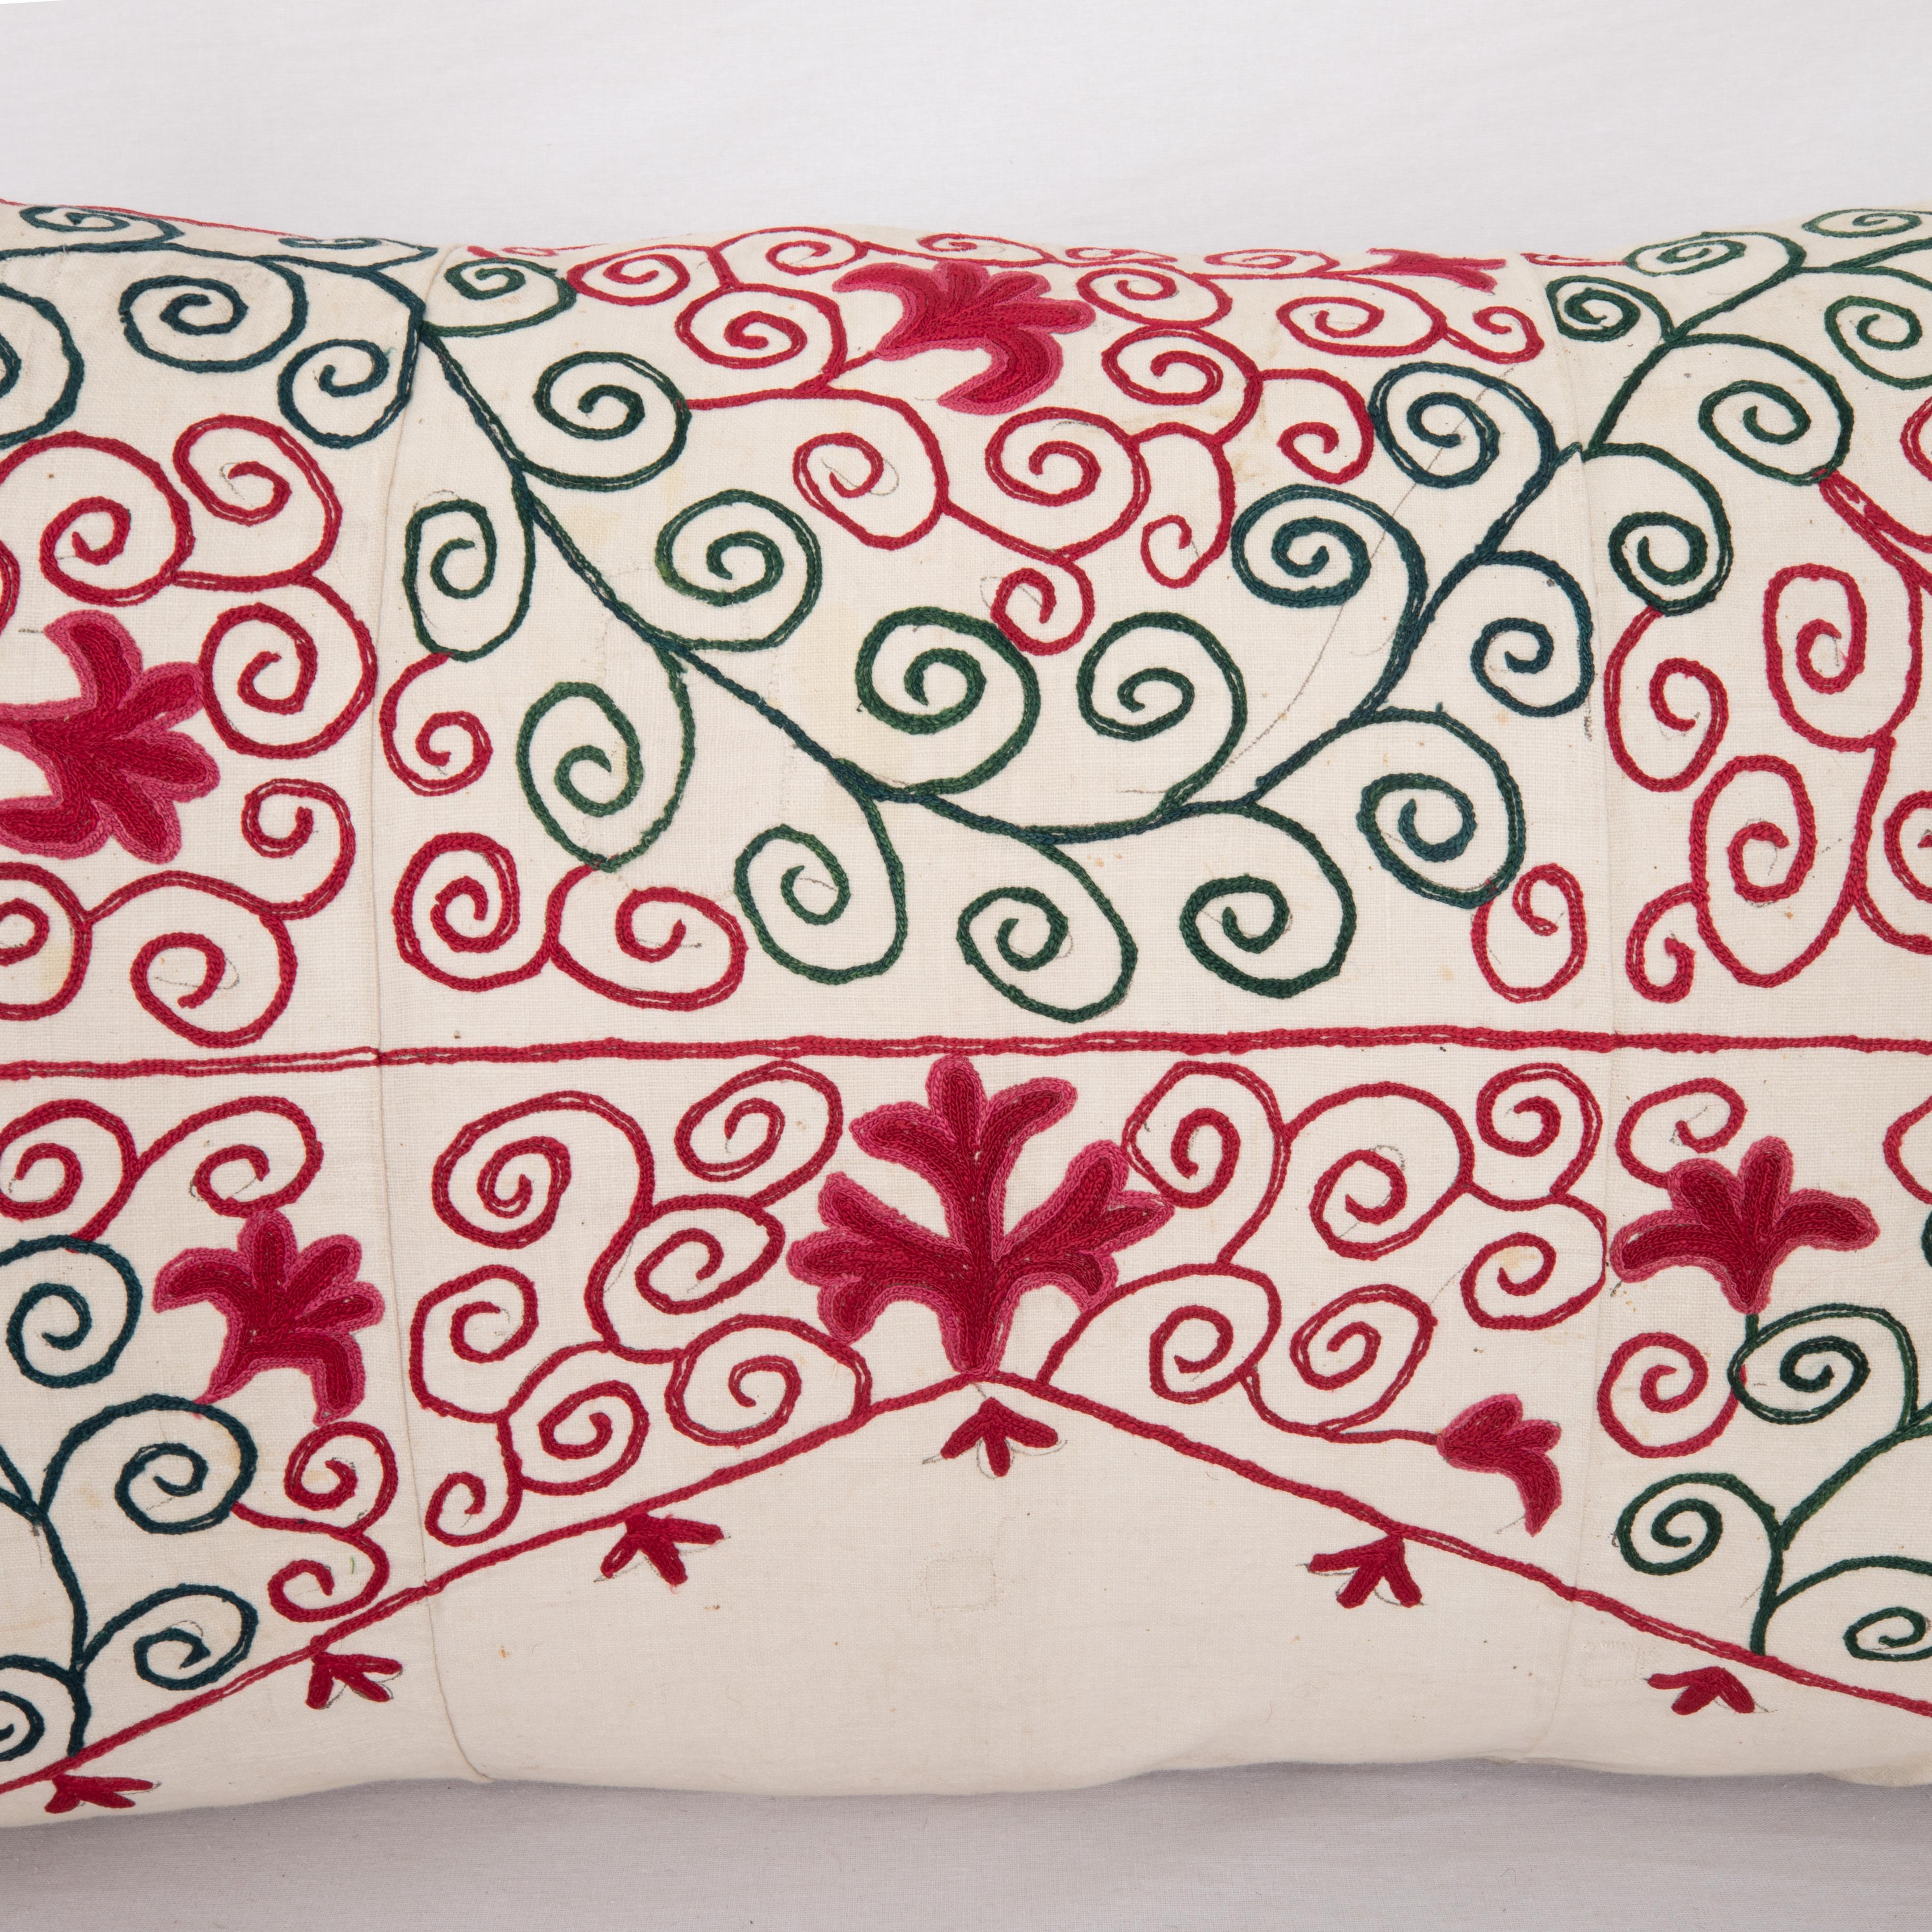 Embroidered Suzani Pillow Case Made from an Antique Suzani, Early 20th Century For Sale